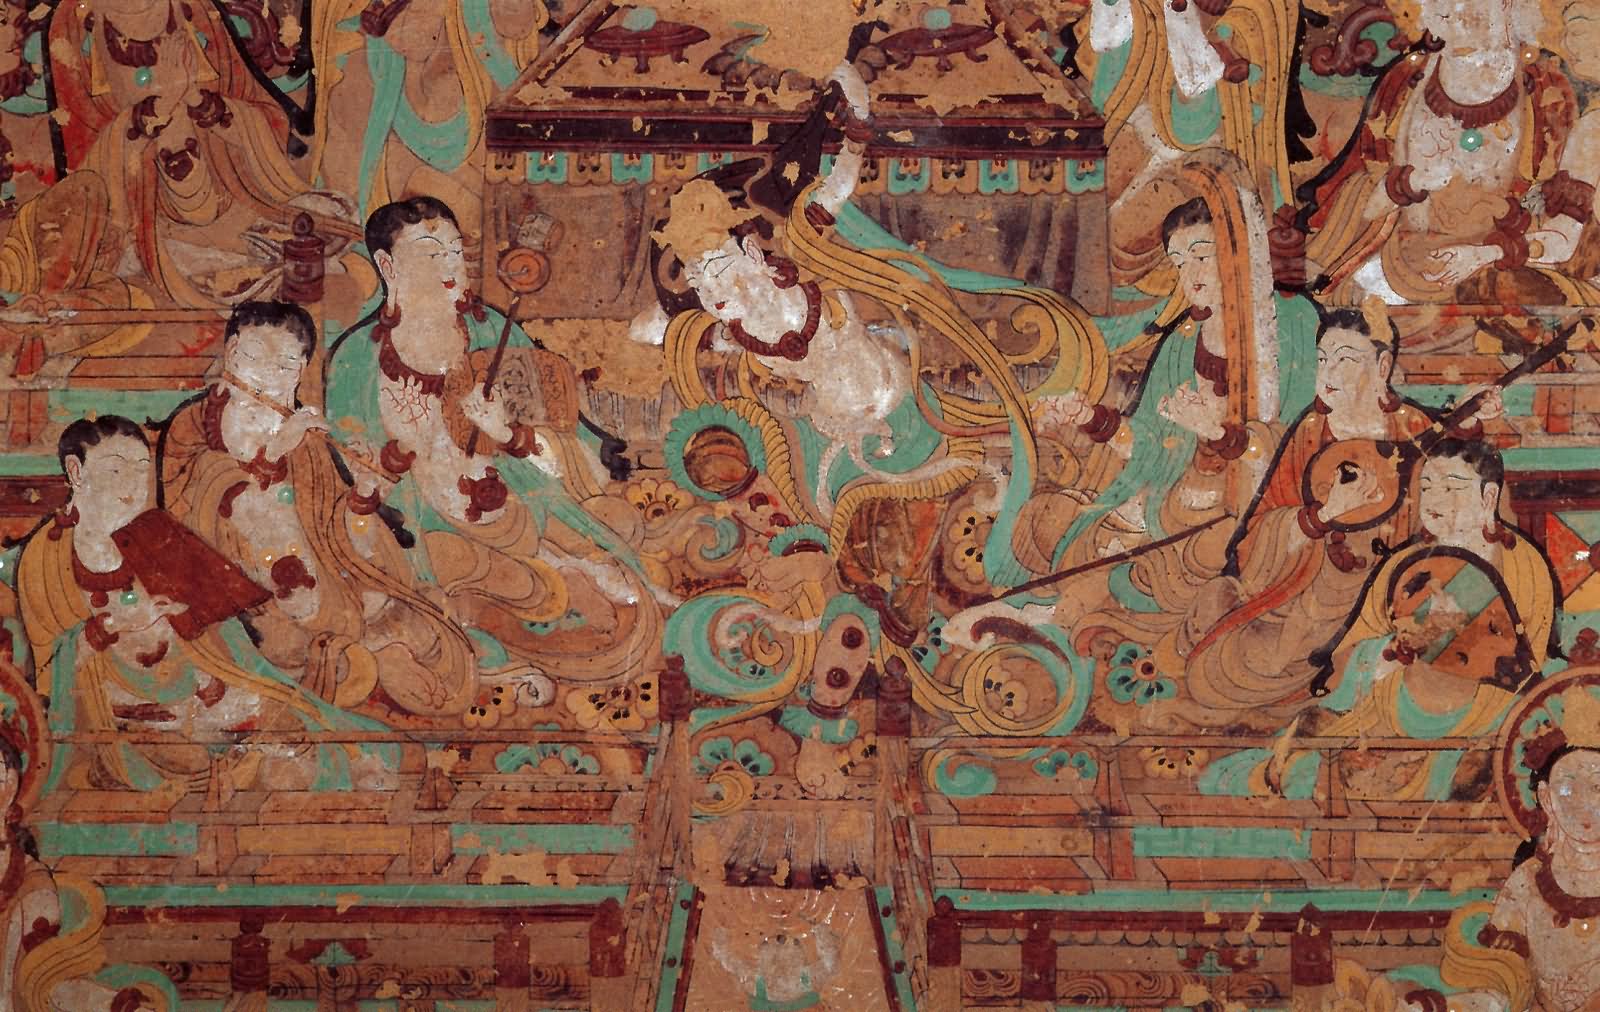 Beautiful Paitings Inside The Mogao Caves, Dunhuang